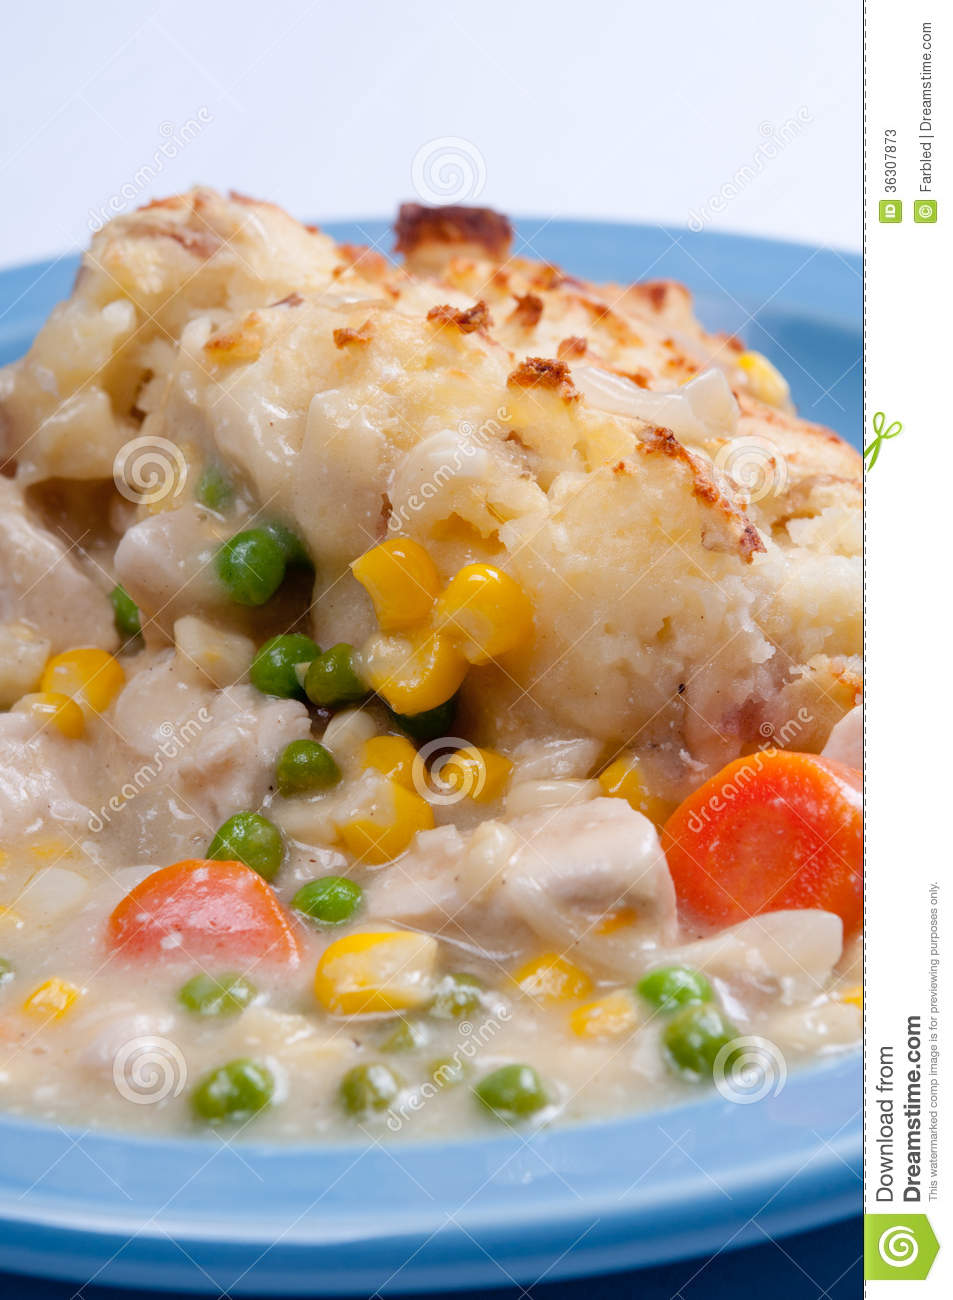 Chicken Pot Pie With Mashed Potatoes And A Crispy Topping